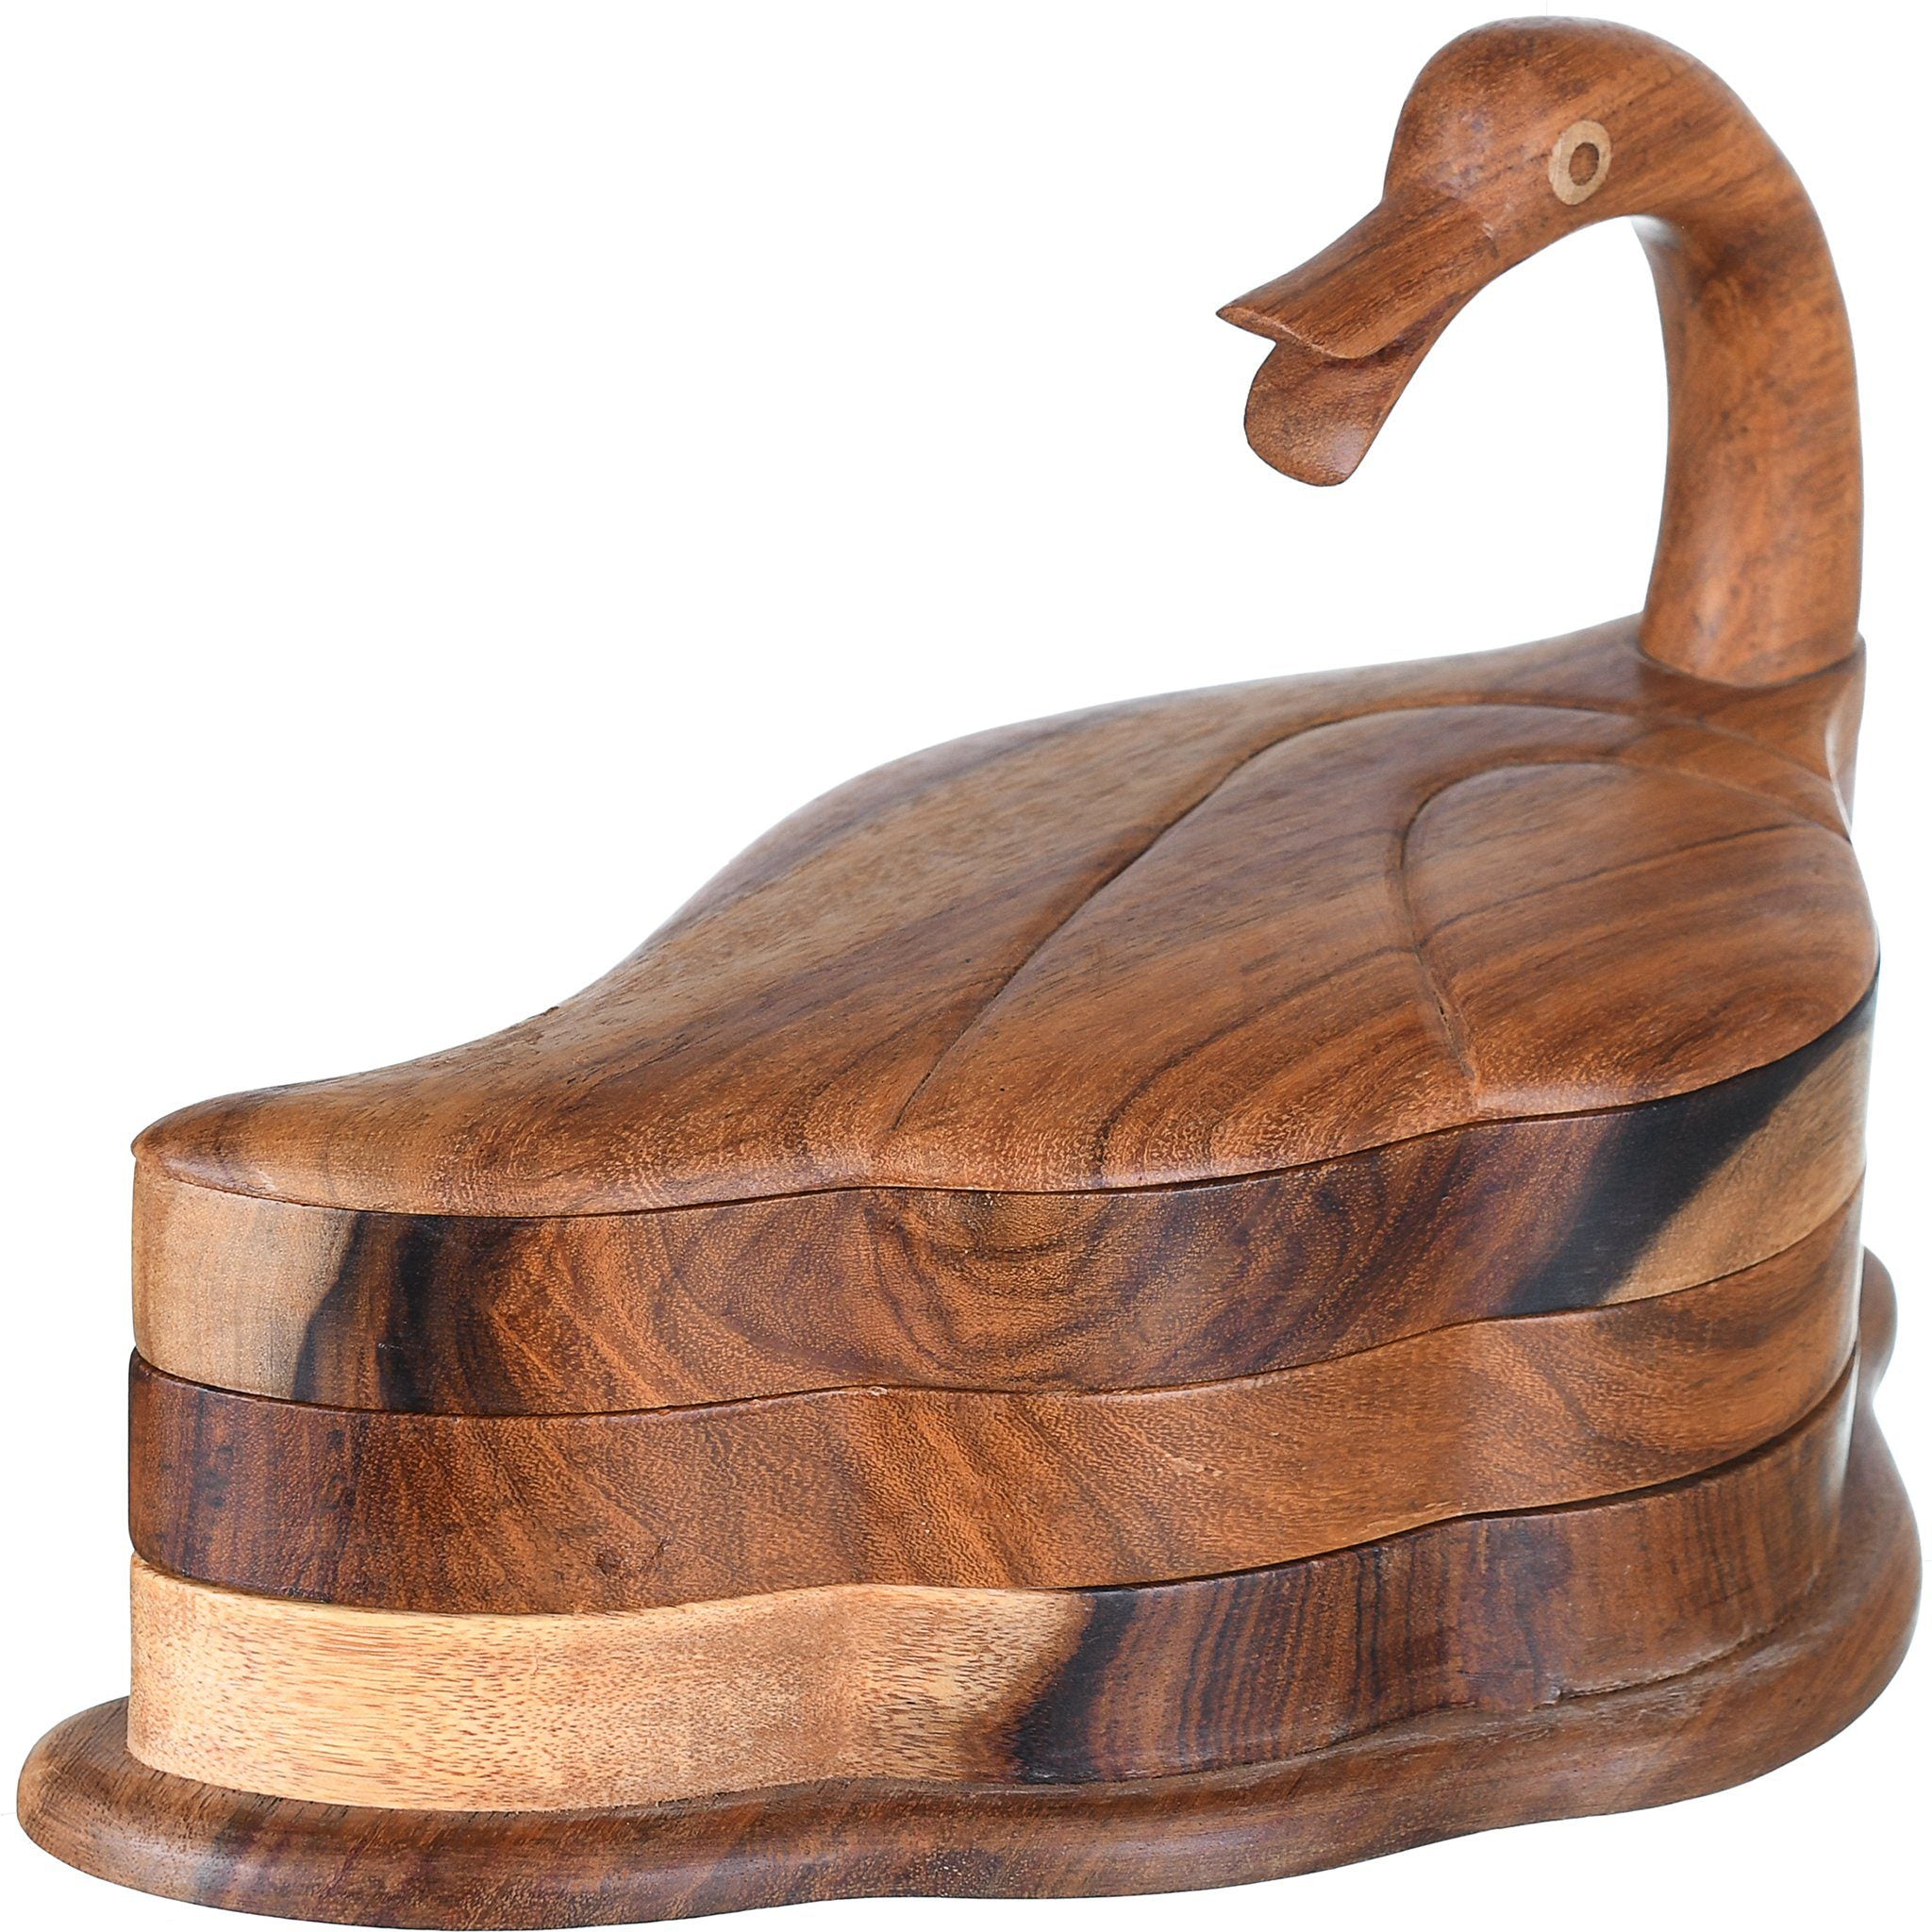 Wooden Duck Shaped Box 3 Tiers - 27x15x20cm - 590006